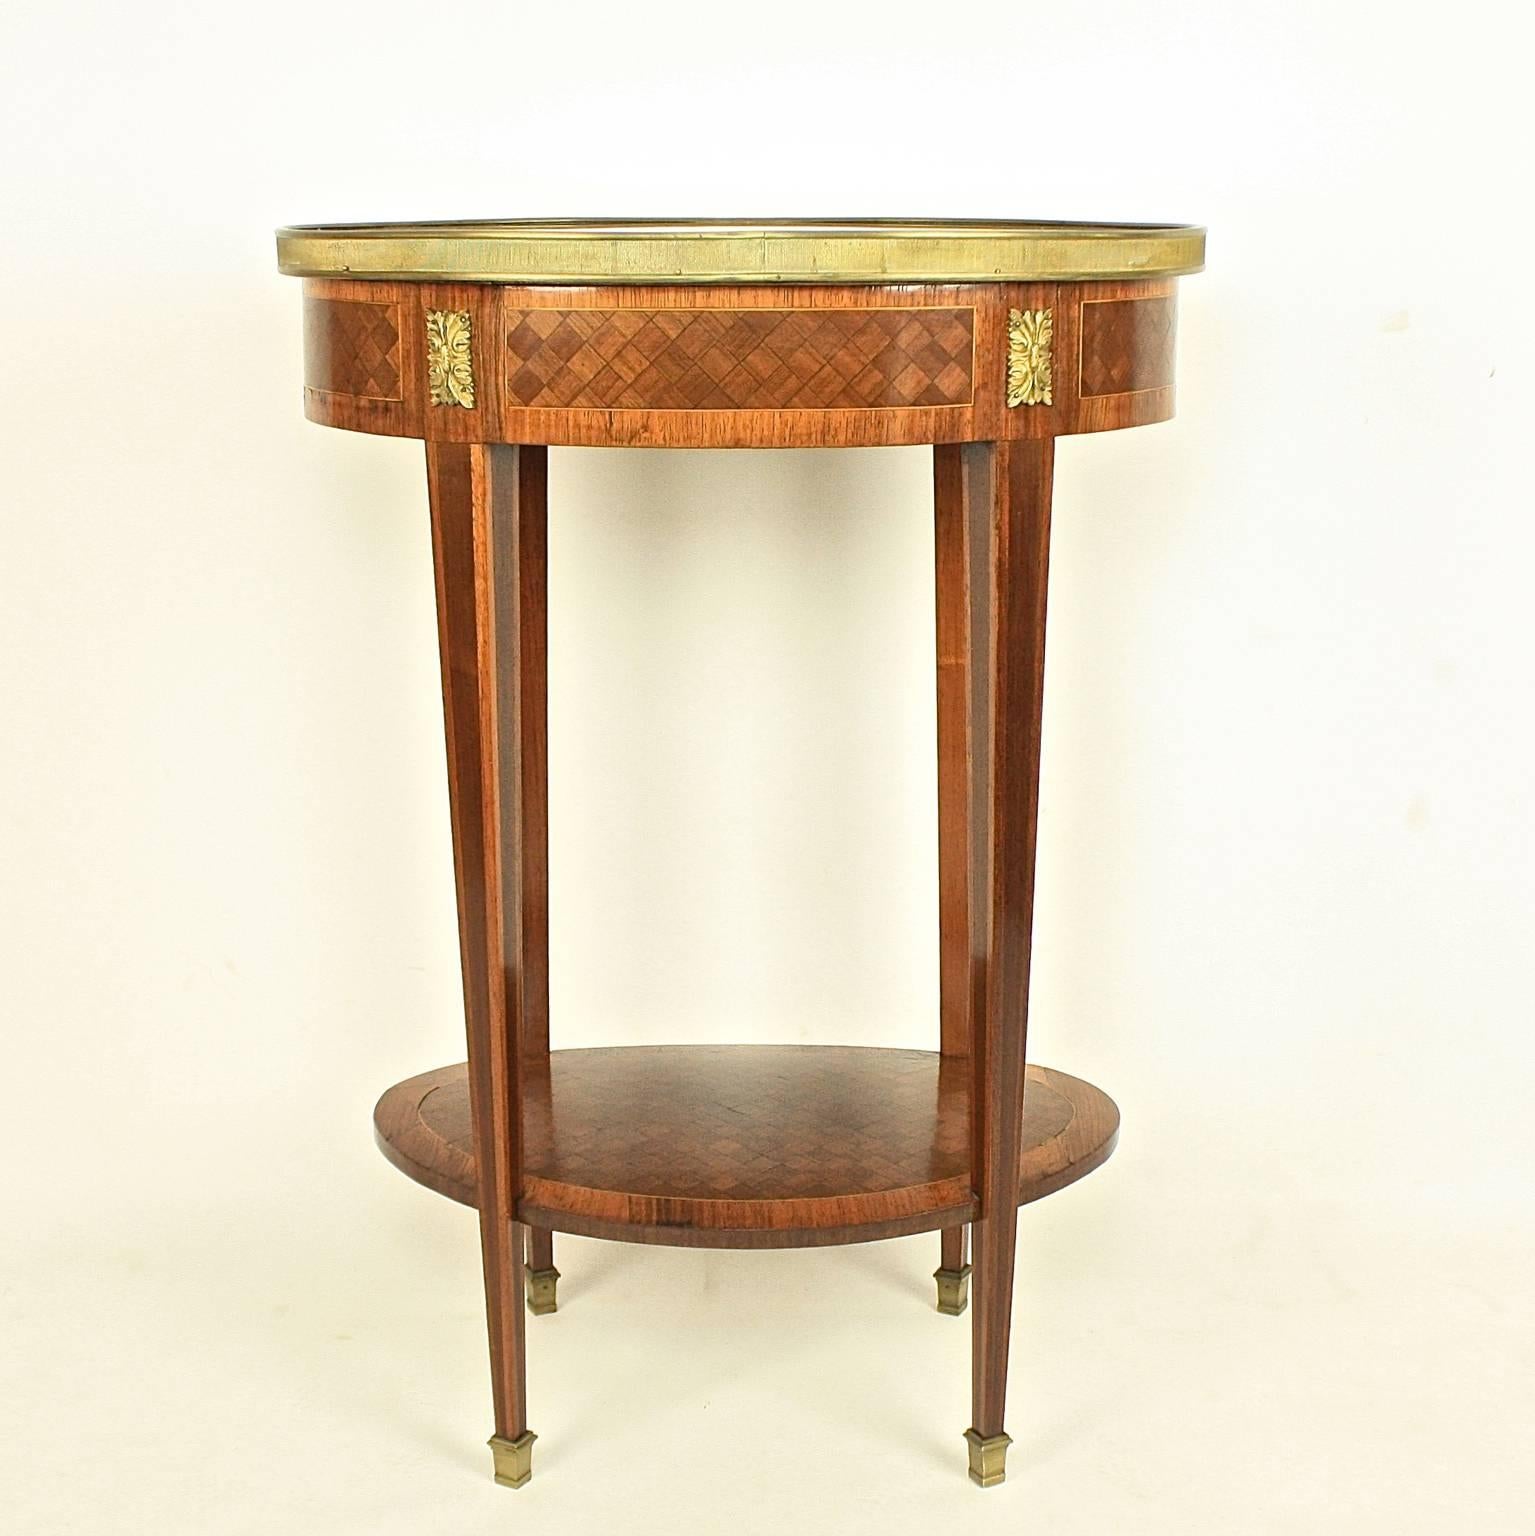 Breccia Marble 19th Century Bronze-Mounted Marquetry Oval Side Table with Red Marble top